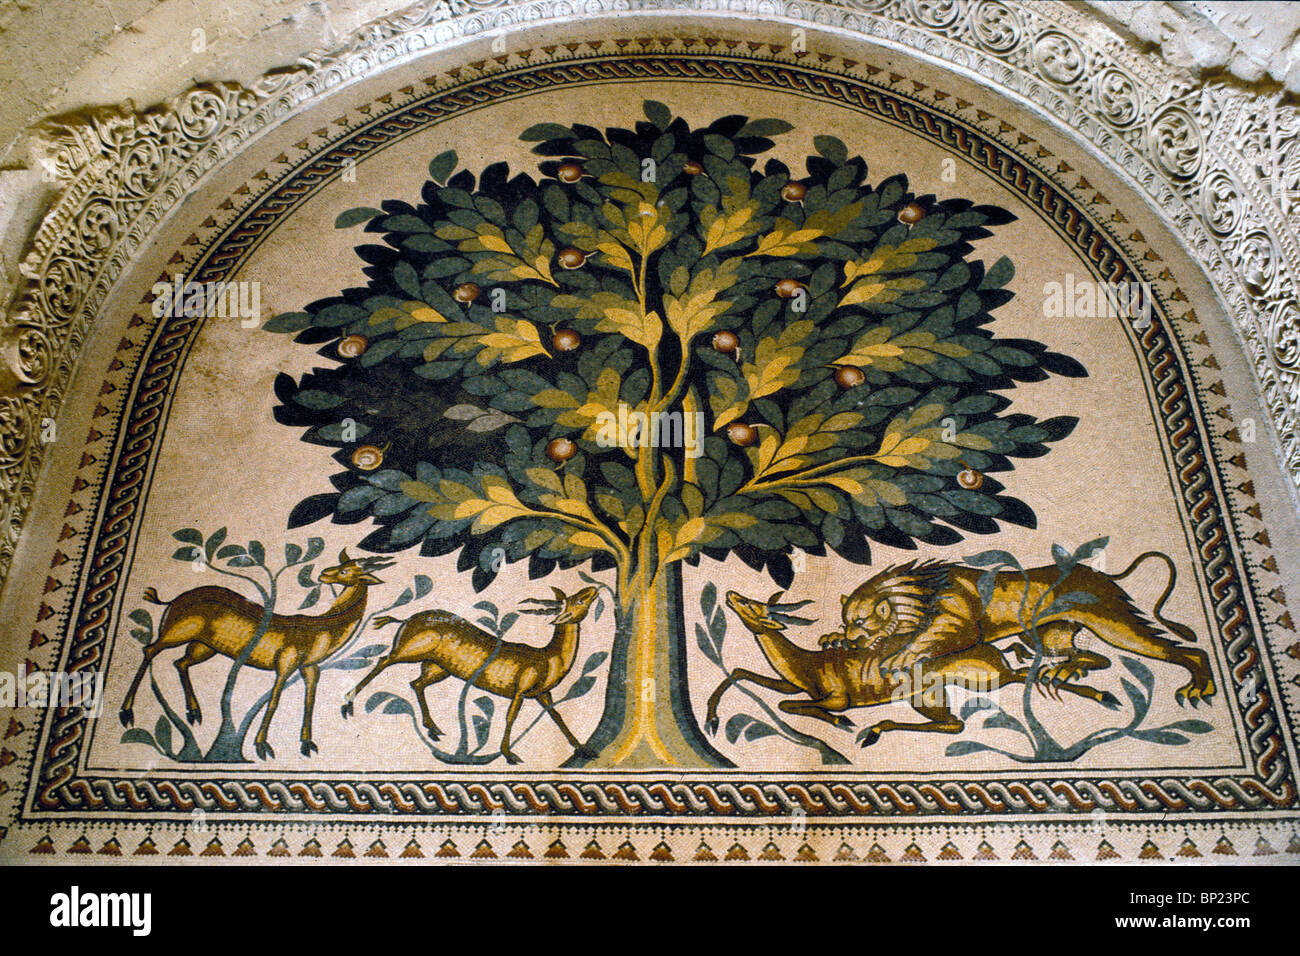 276. MOSAIC FROM HISHAM'S PALACE IN JERICHO DEPICTING ANIMALS UNDER THE TREE OF LIFE. CA. 8TH. C. AD. Stock Photo